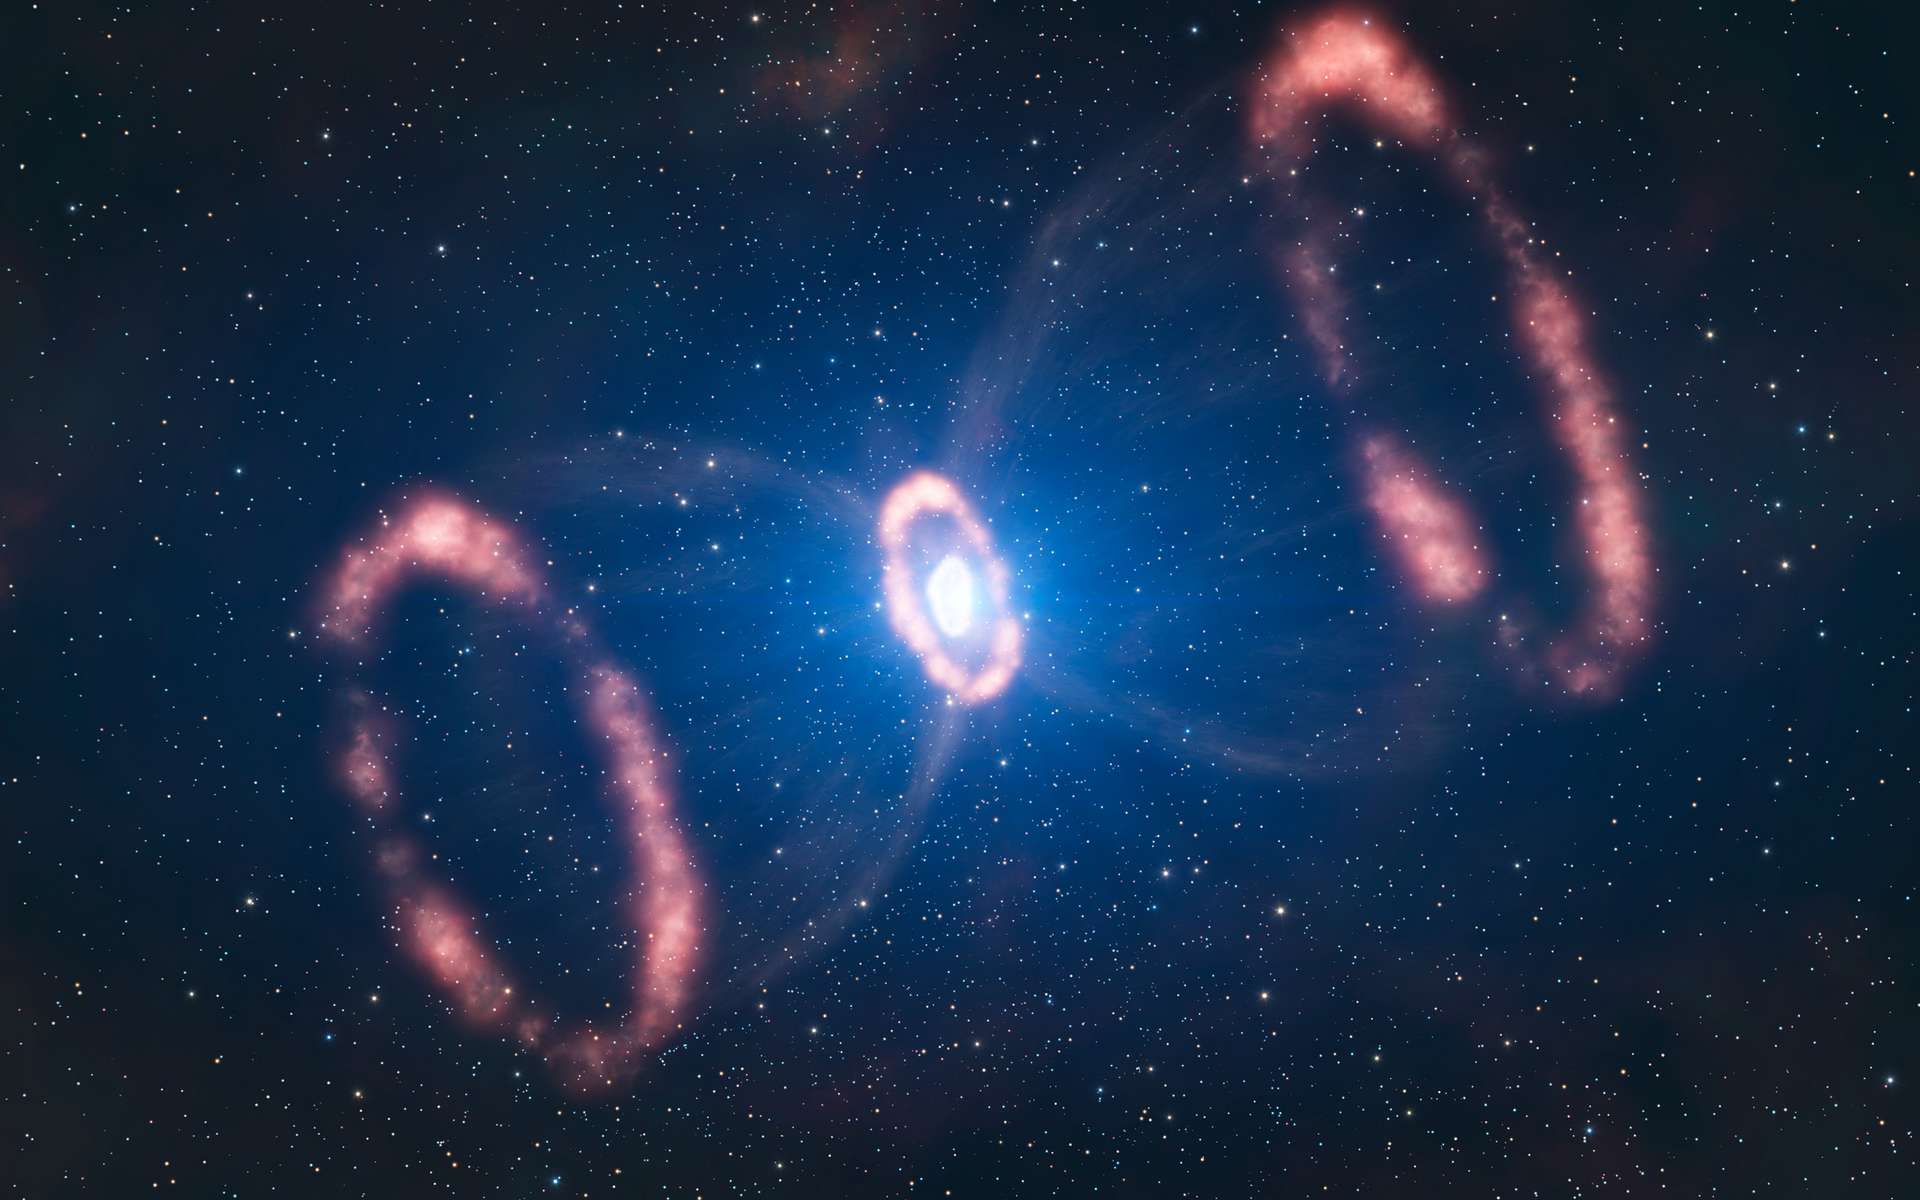 The James-Webb reveals a new face of the mythical supernova SN 1987A